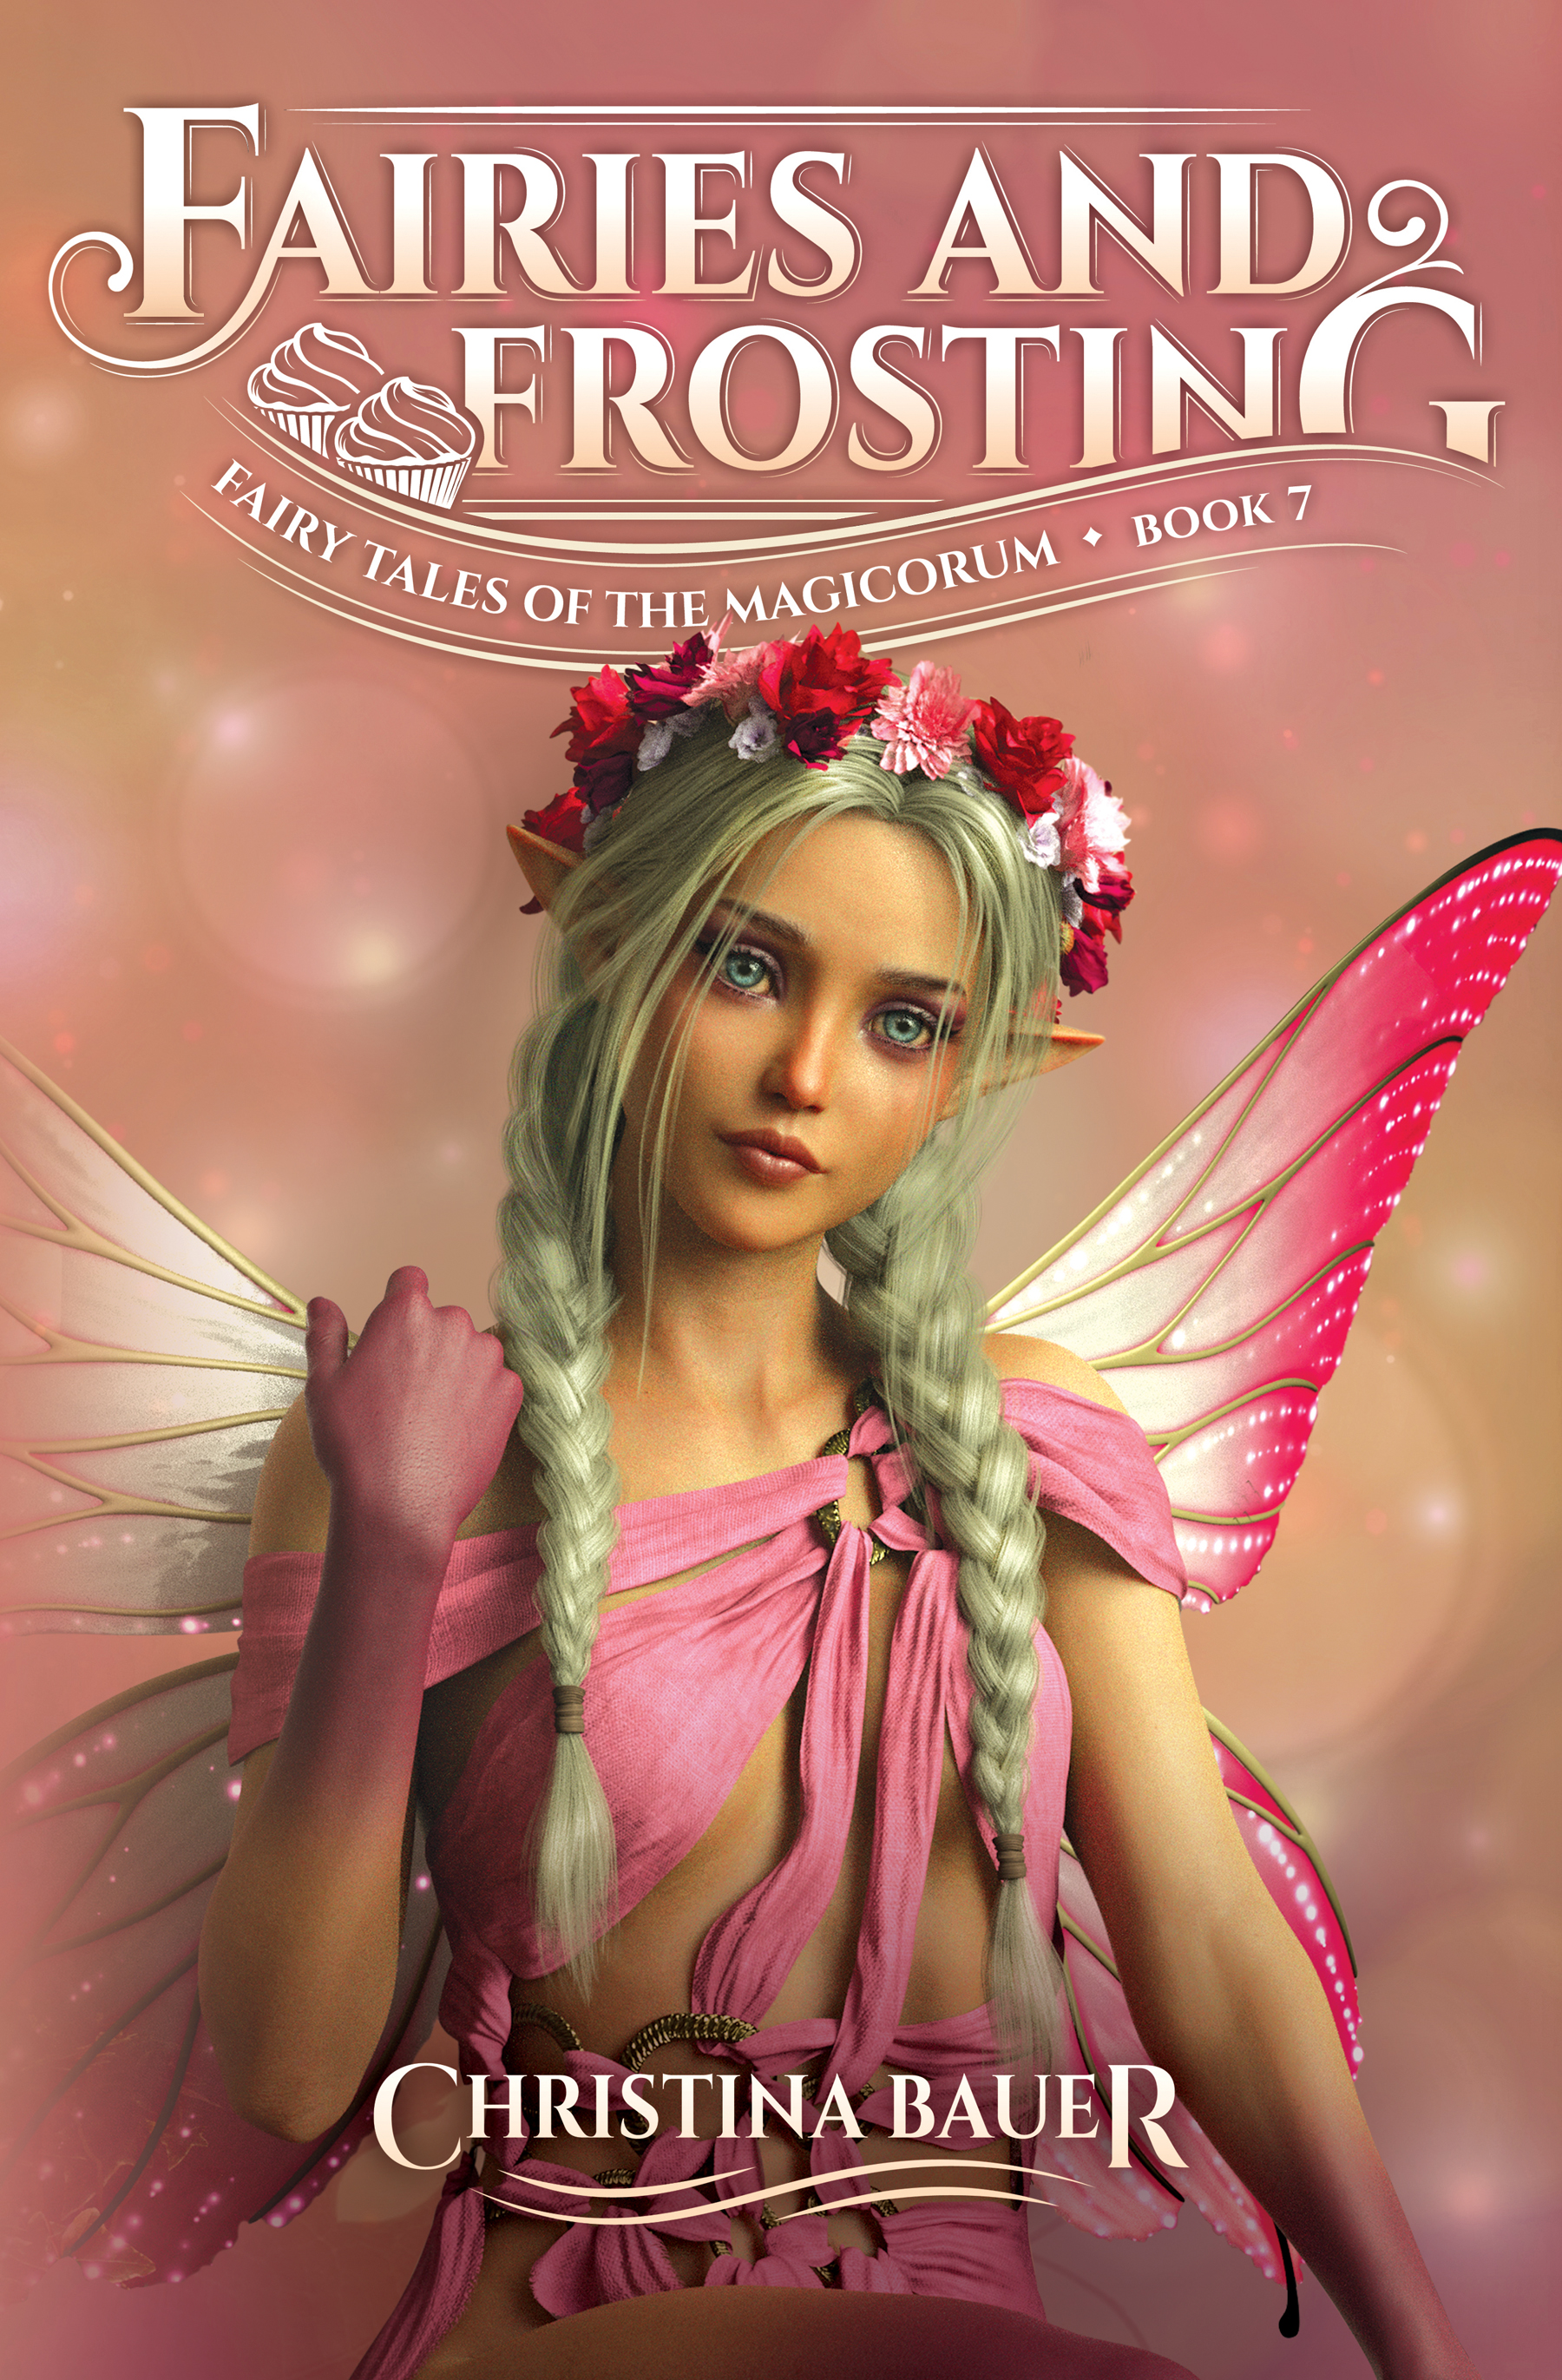 FAIRIES AND FROSTING (Book 7)